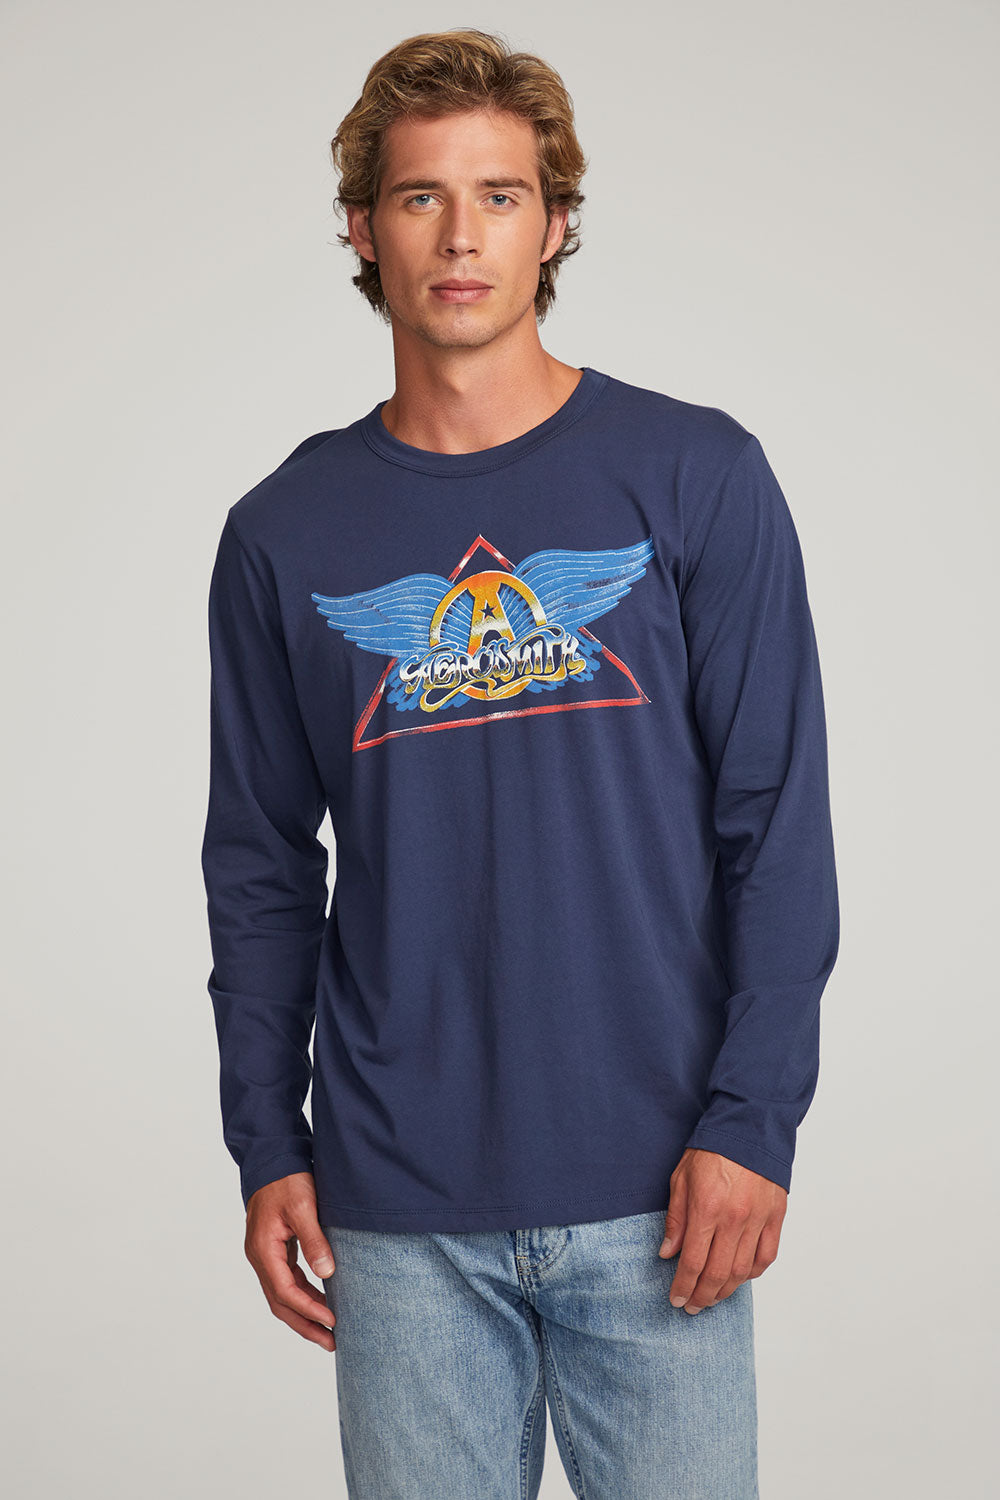 Aerosmith Rock In a Hard Place Mens Long Sleeve MENS chaserbrand